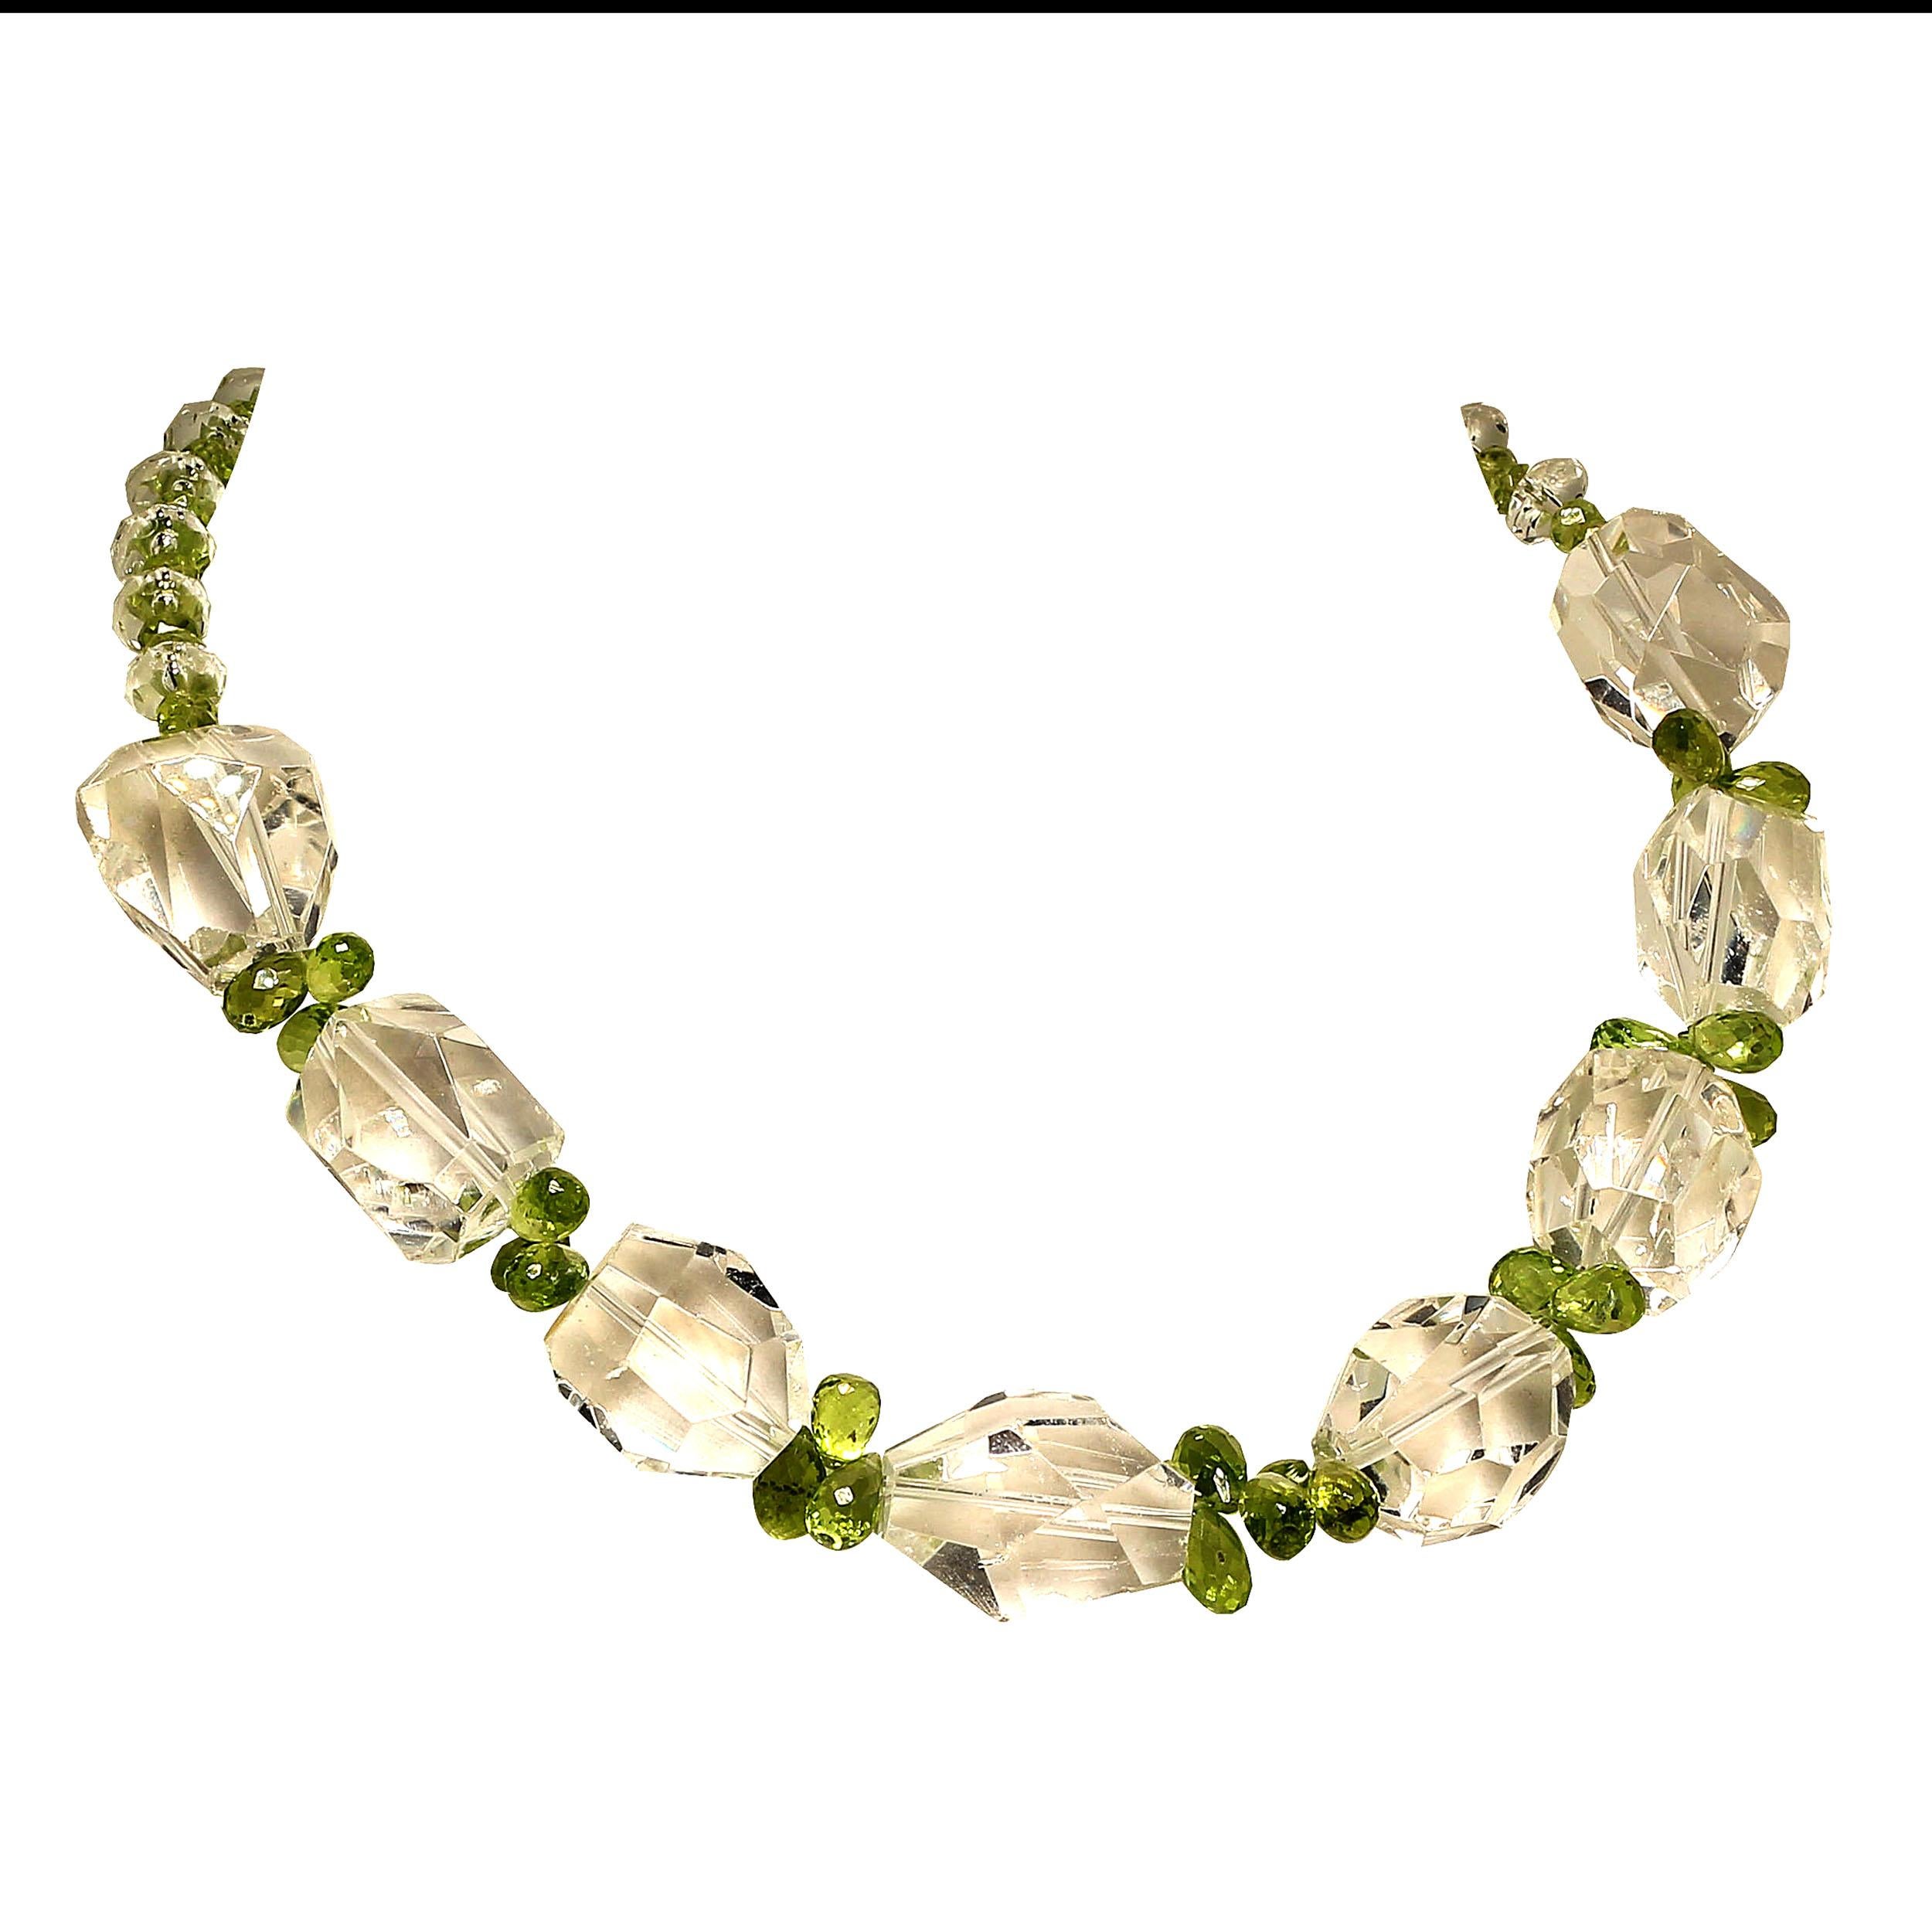 Bead AJD Sparkling Clear Quartz Crystal and Green Peridot Choker Necklace